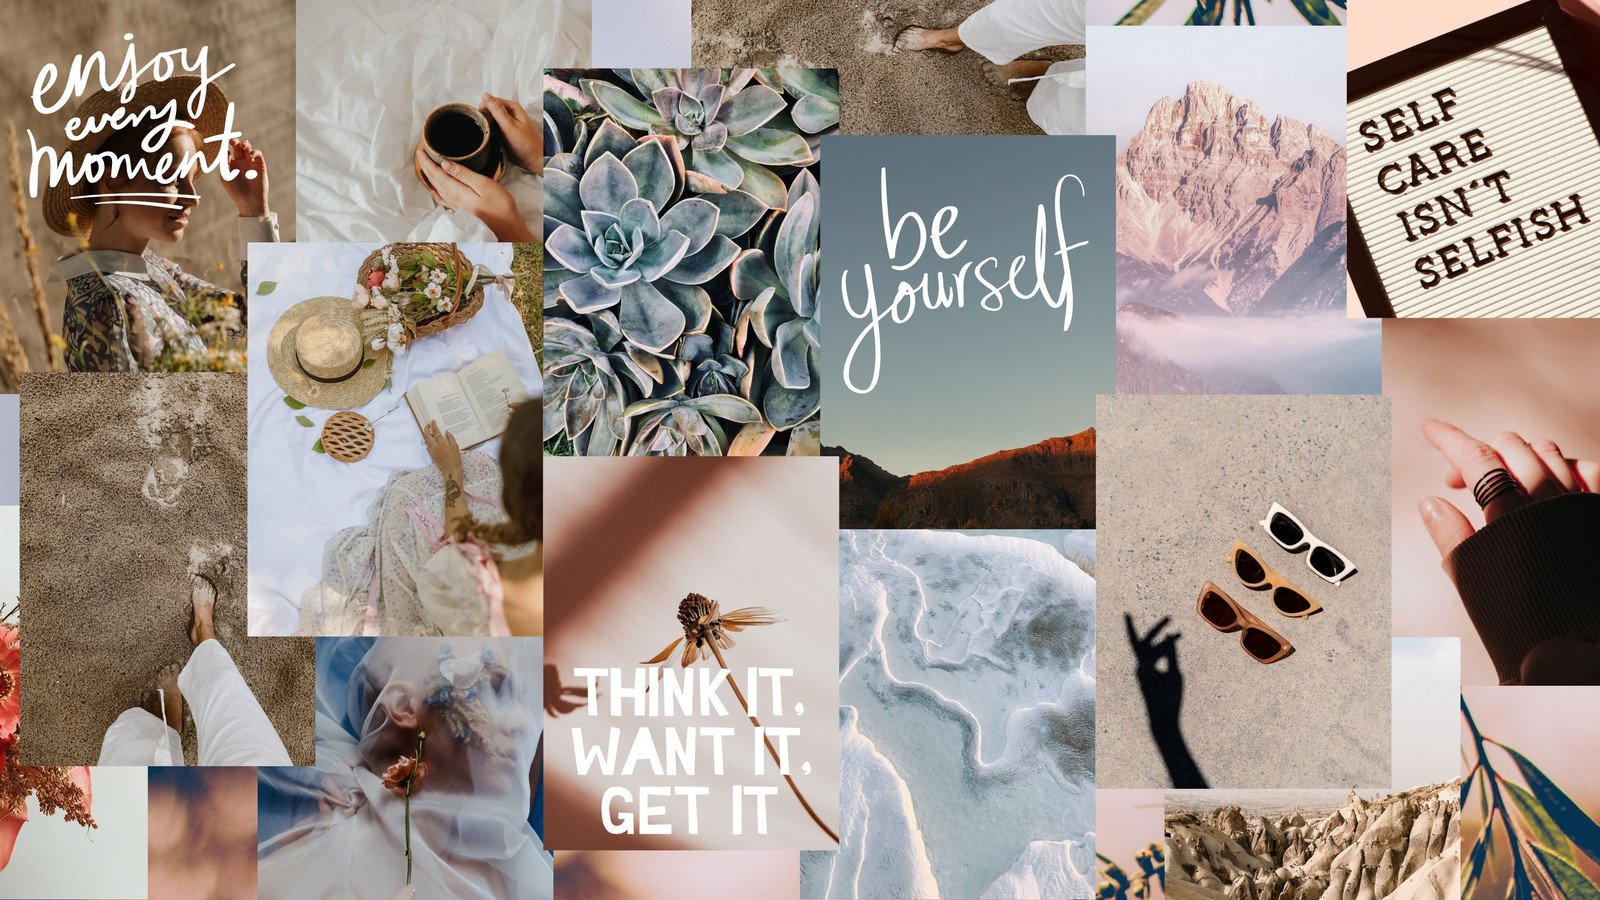 Free and fully customizable desktop wallpaper templates